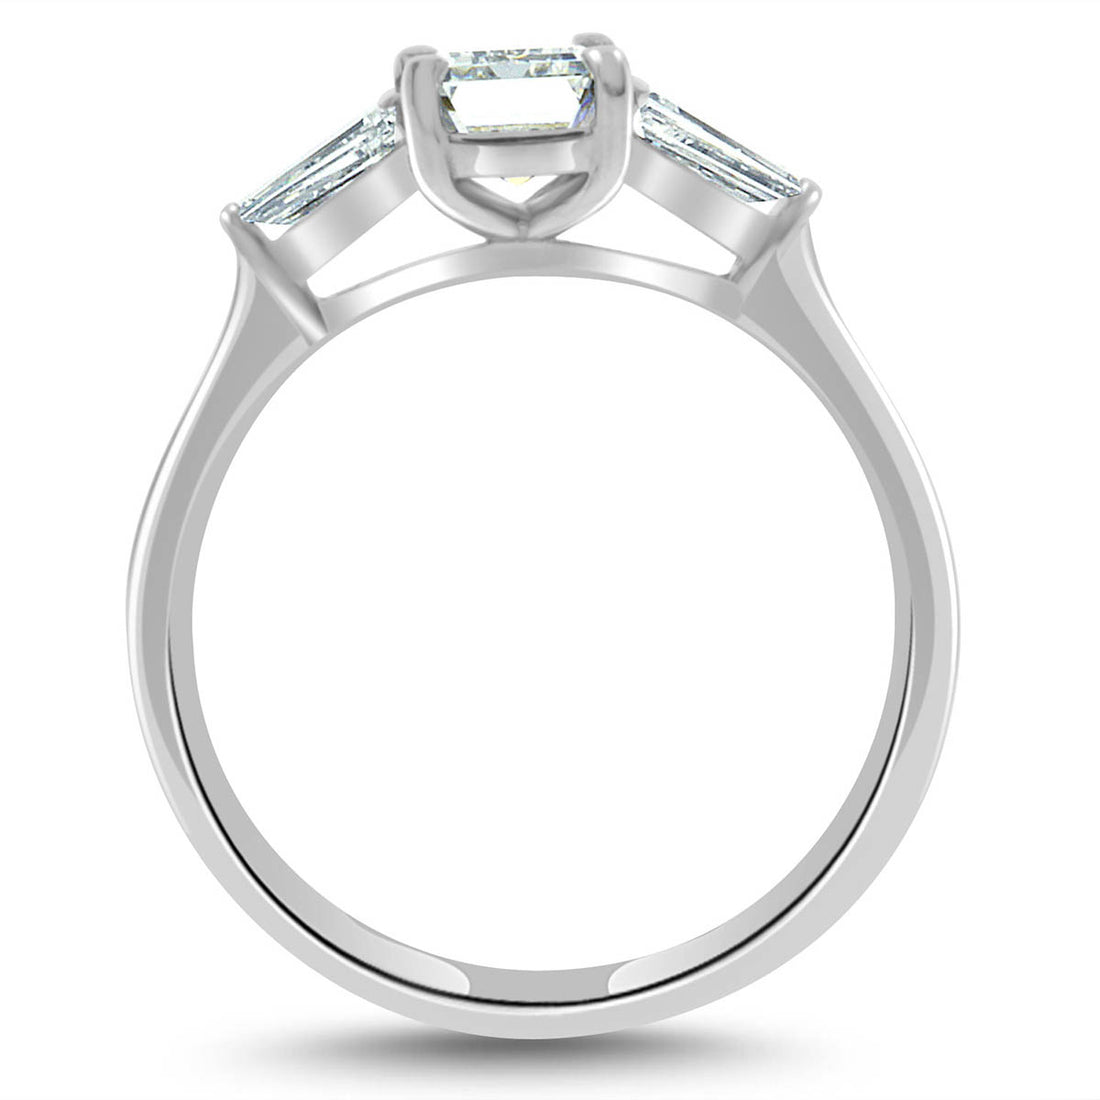 Emerald Cut With Tapered Baguettes in white gold standing upright